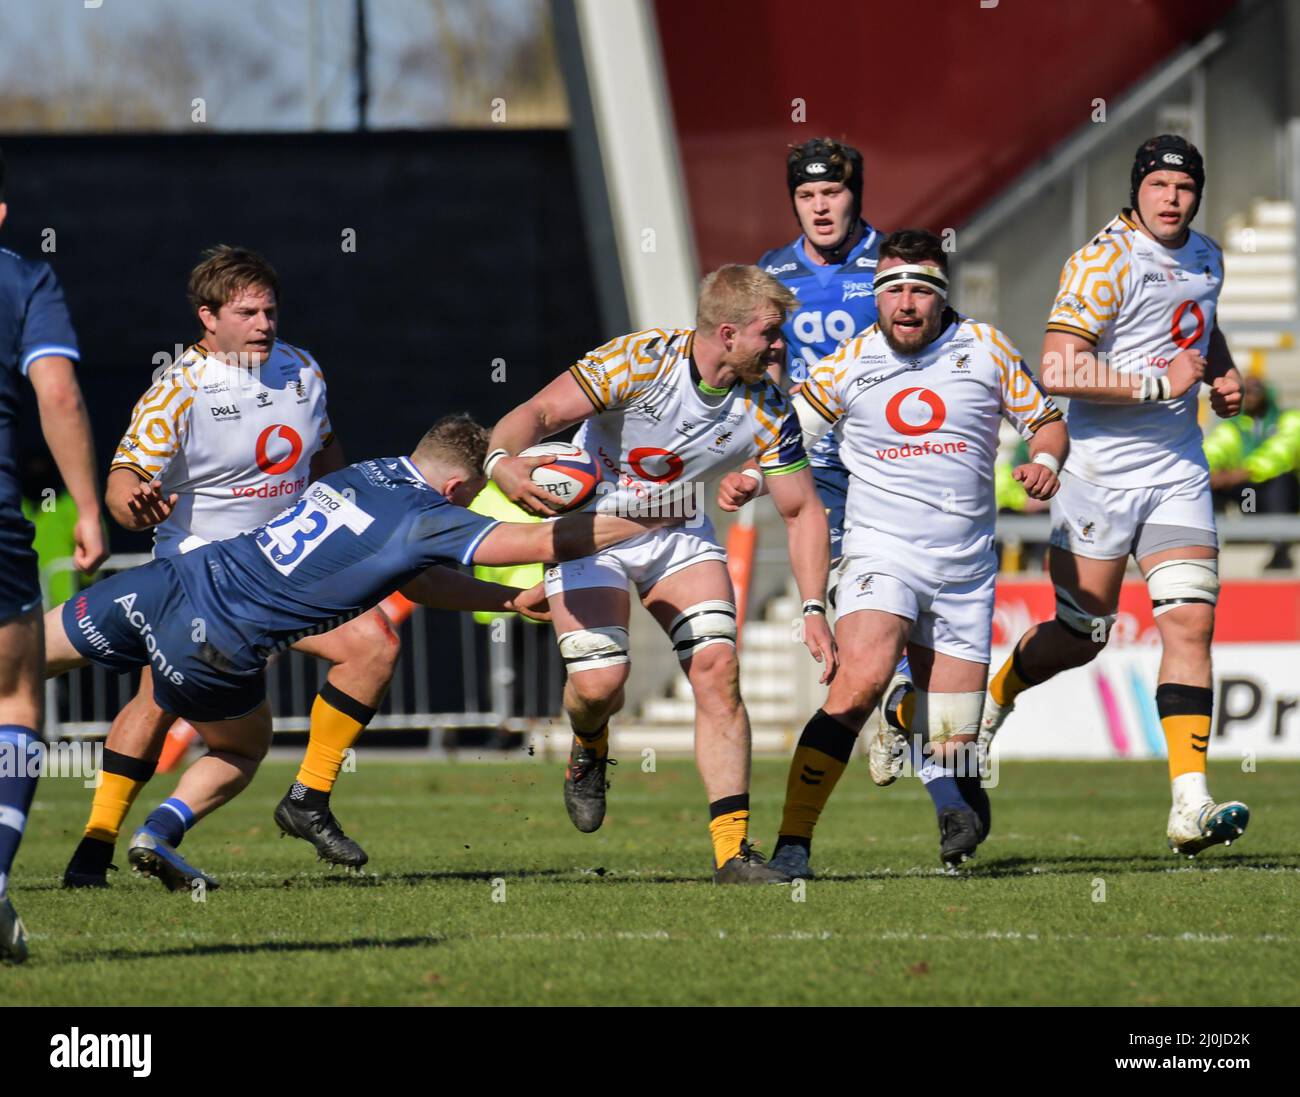 19th March  2022, Greater Manchester, England. Gallagher Premiership Rugby  at the AJ Bell Stadium home ground Sale Sharks  V Wasps.  Final score 26-41 for Wasps . All images © Robert Leyland No use without prior permission. Stock Photo